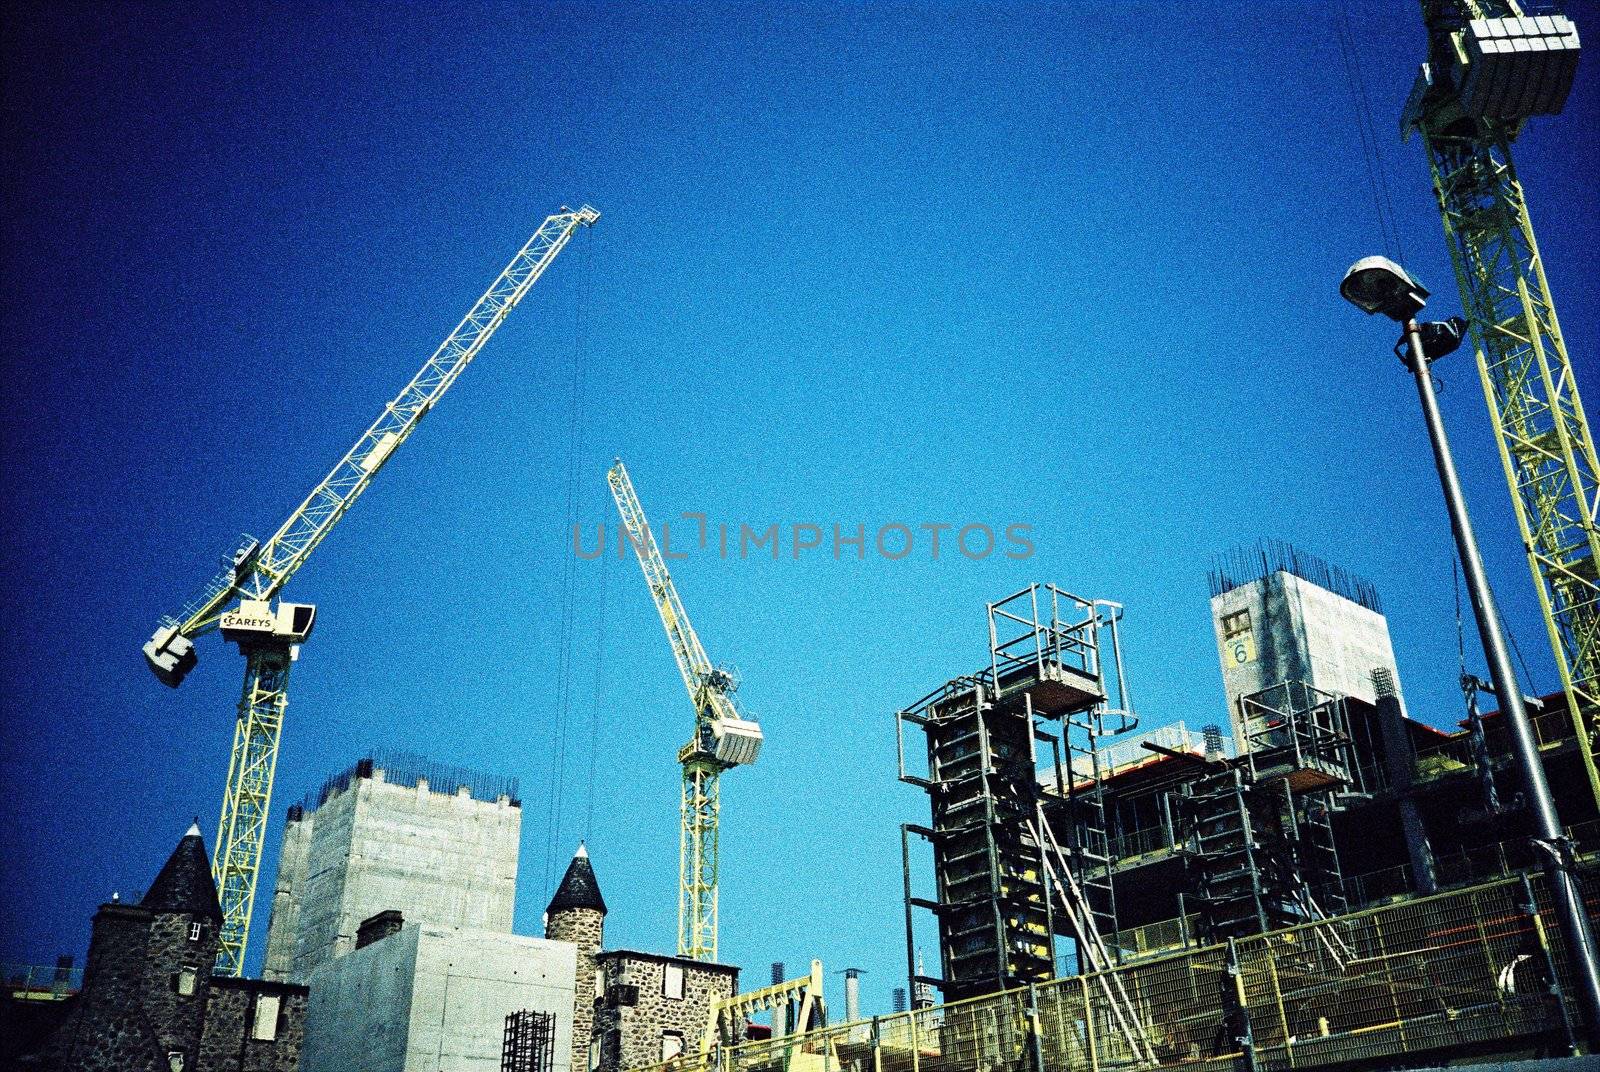 Film image of construction site in Aberdeen